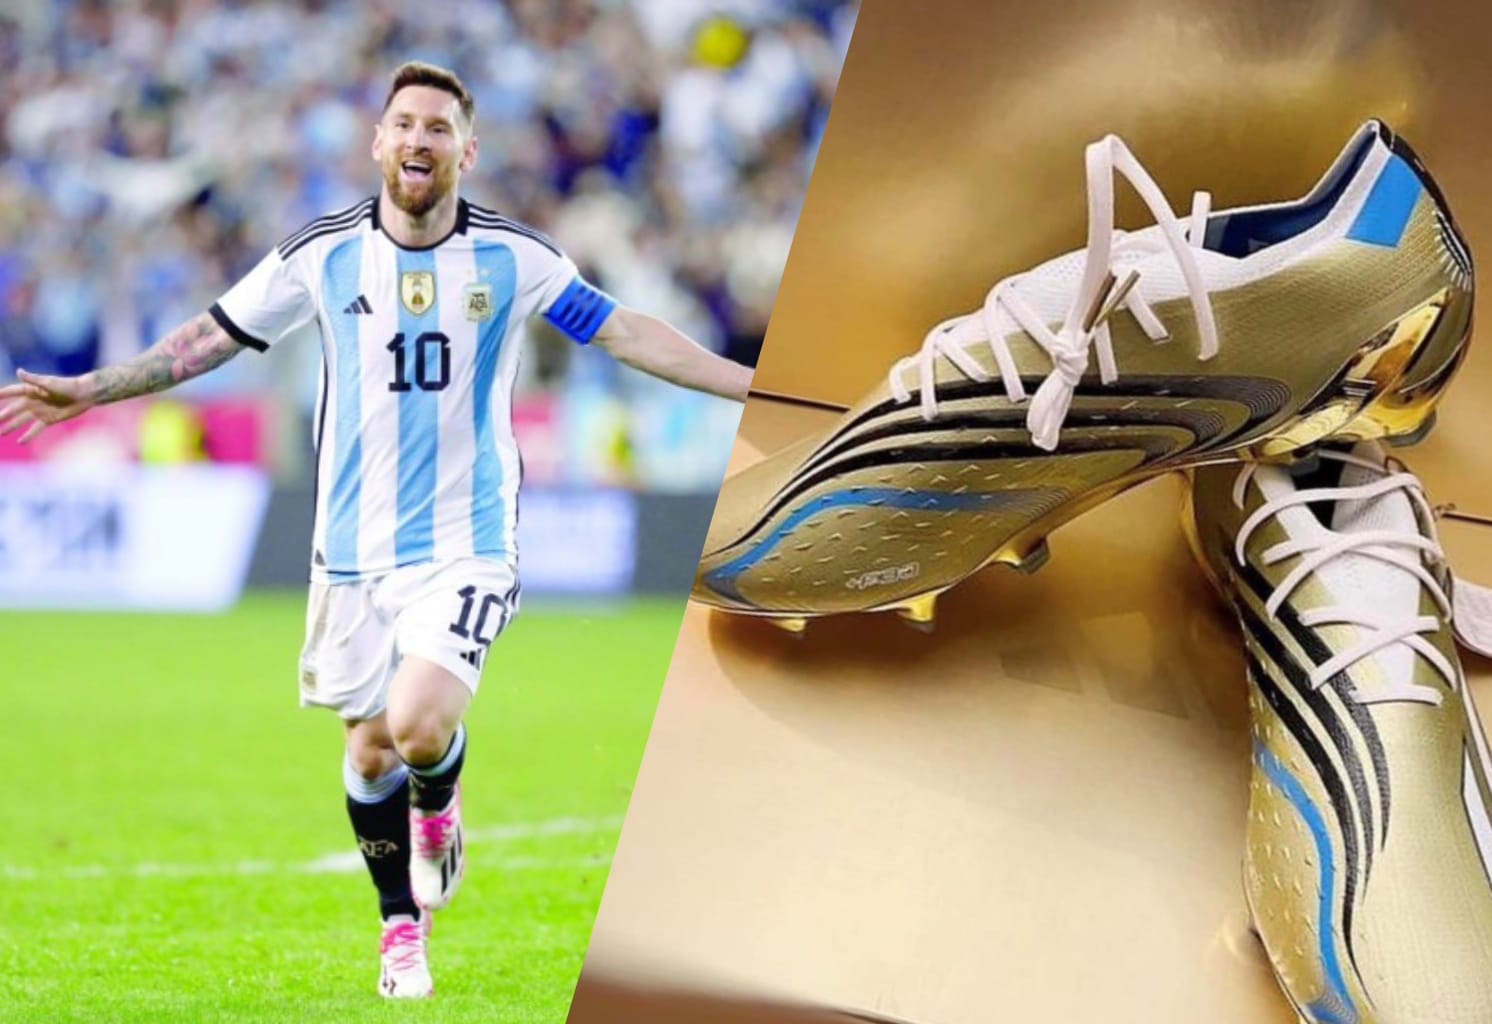 Lionel World Cup Boots: Lionel boots from Adidas for upcoming World Cup revealed online - Check Out